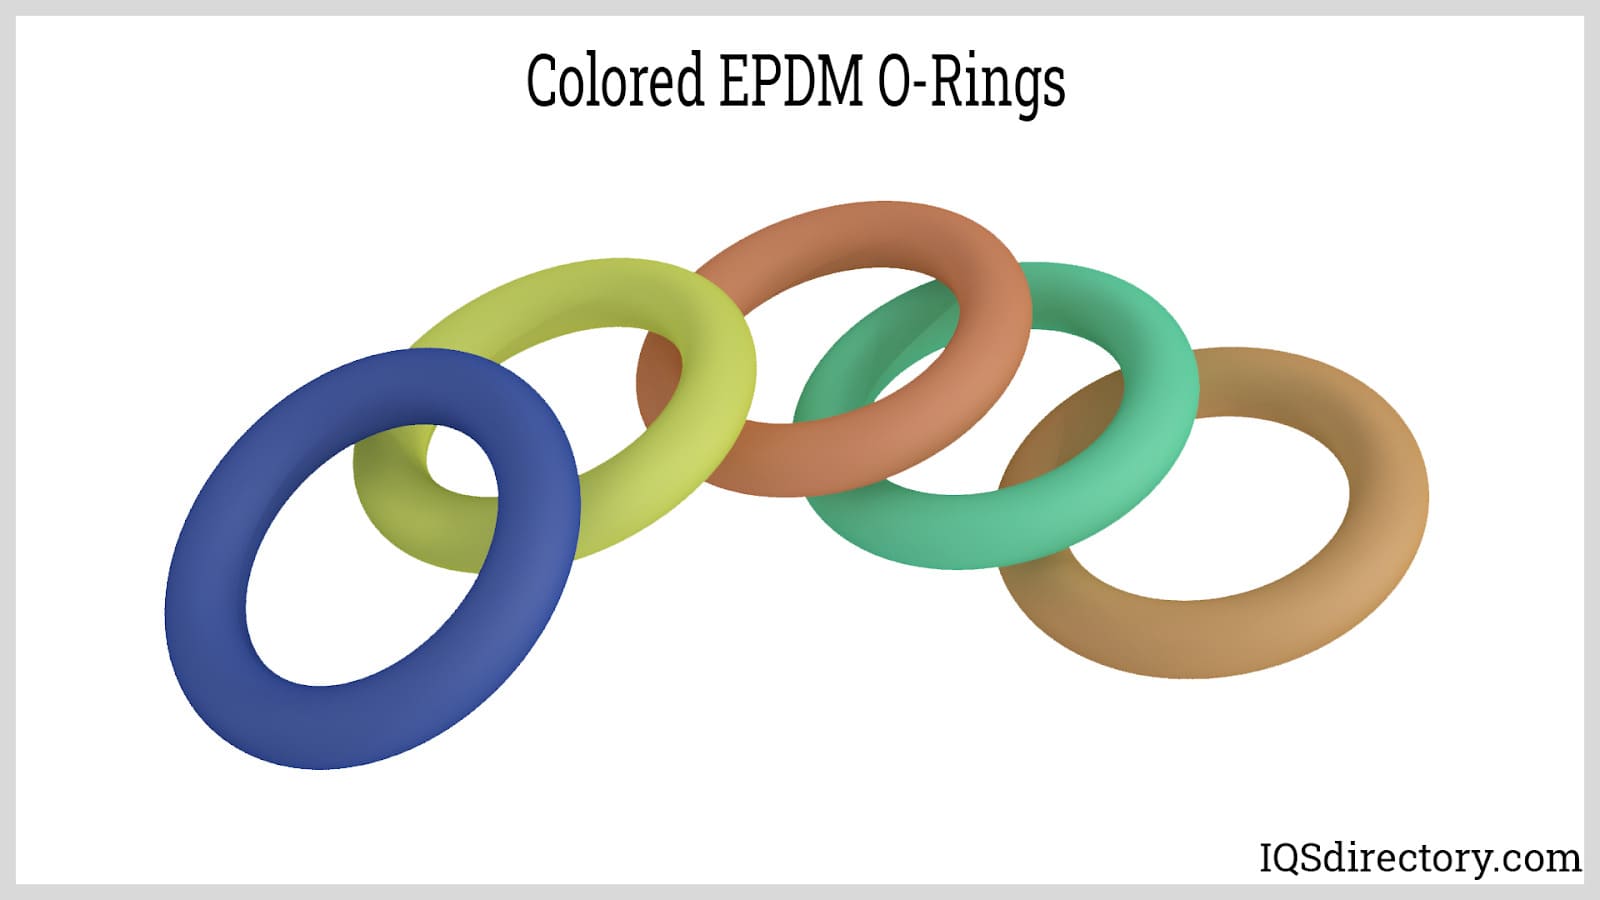 Colored EPDM O-Rings